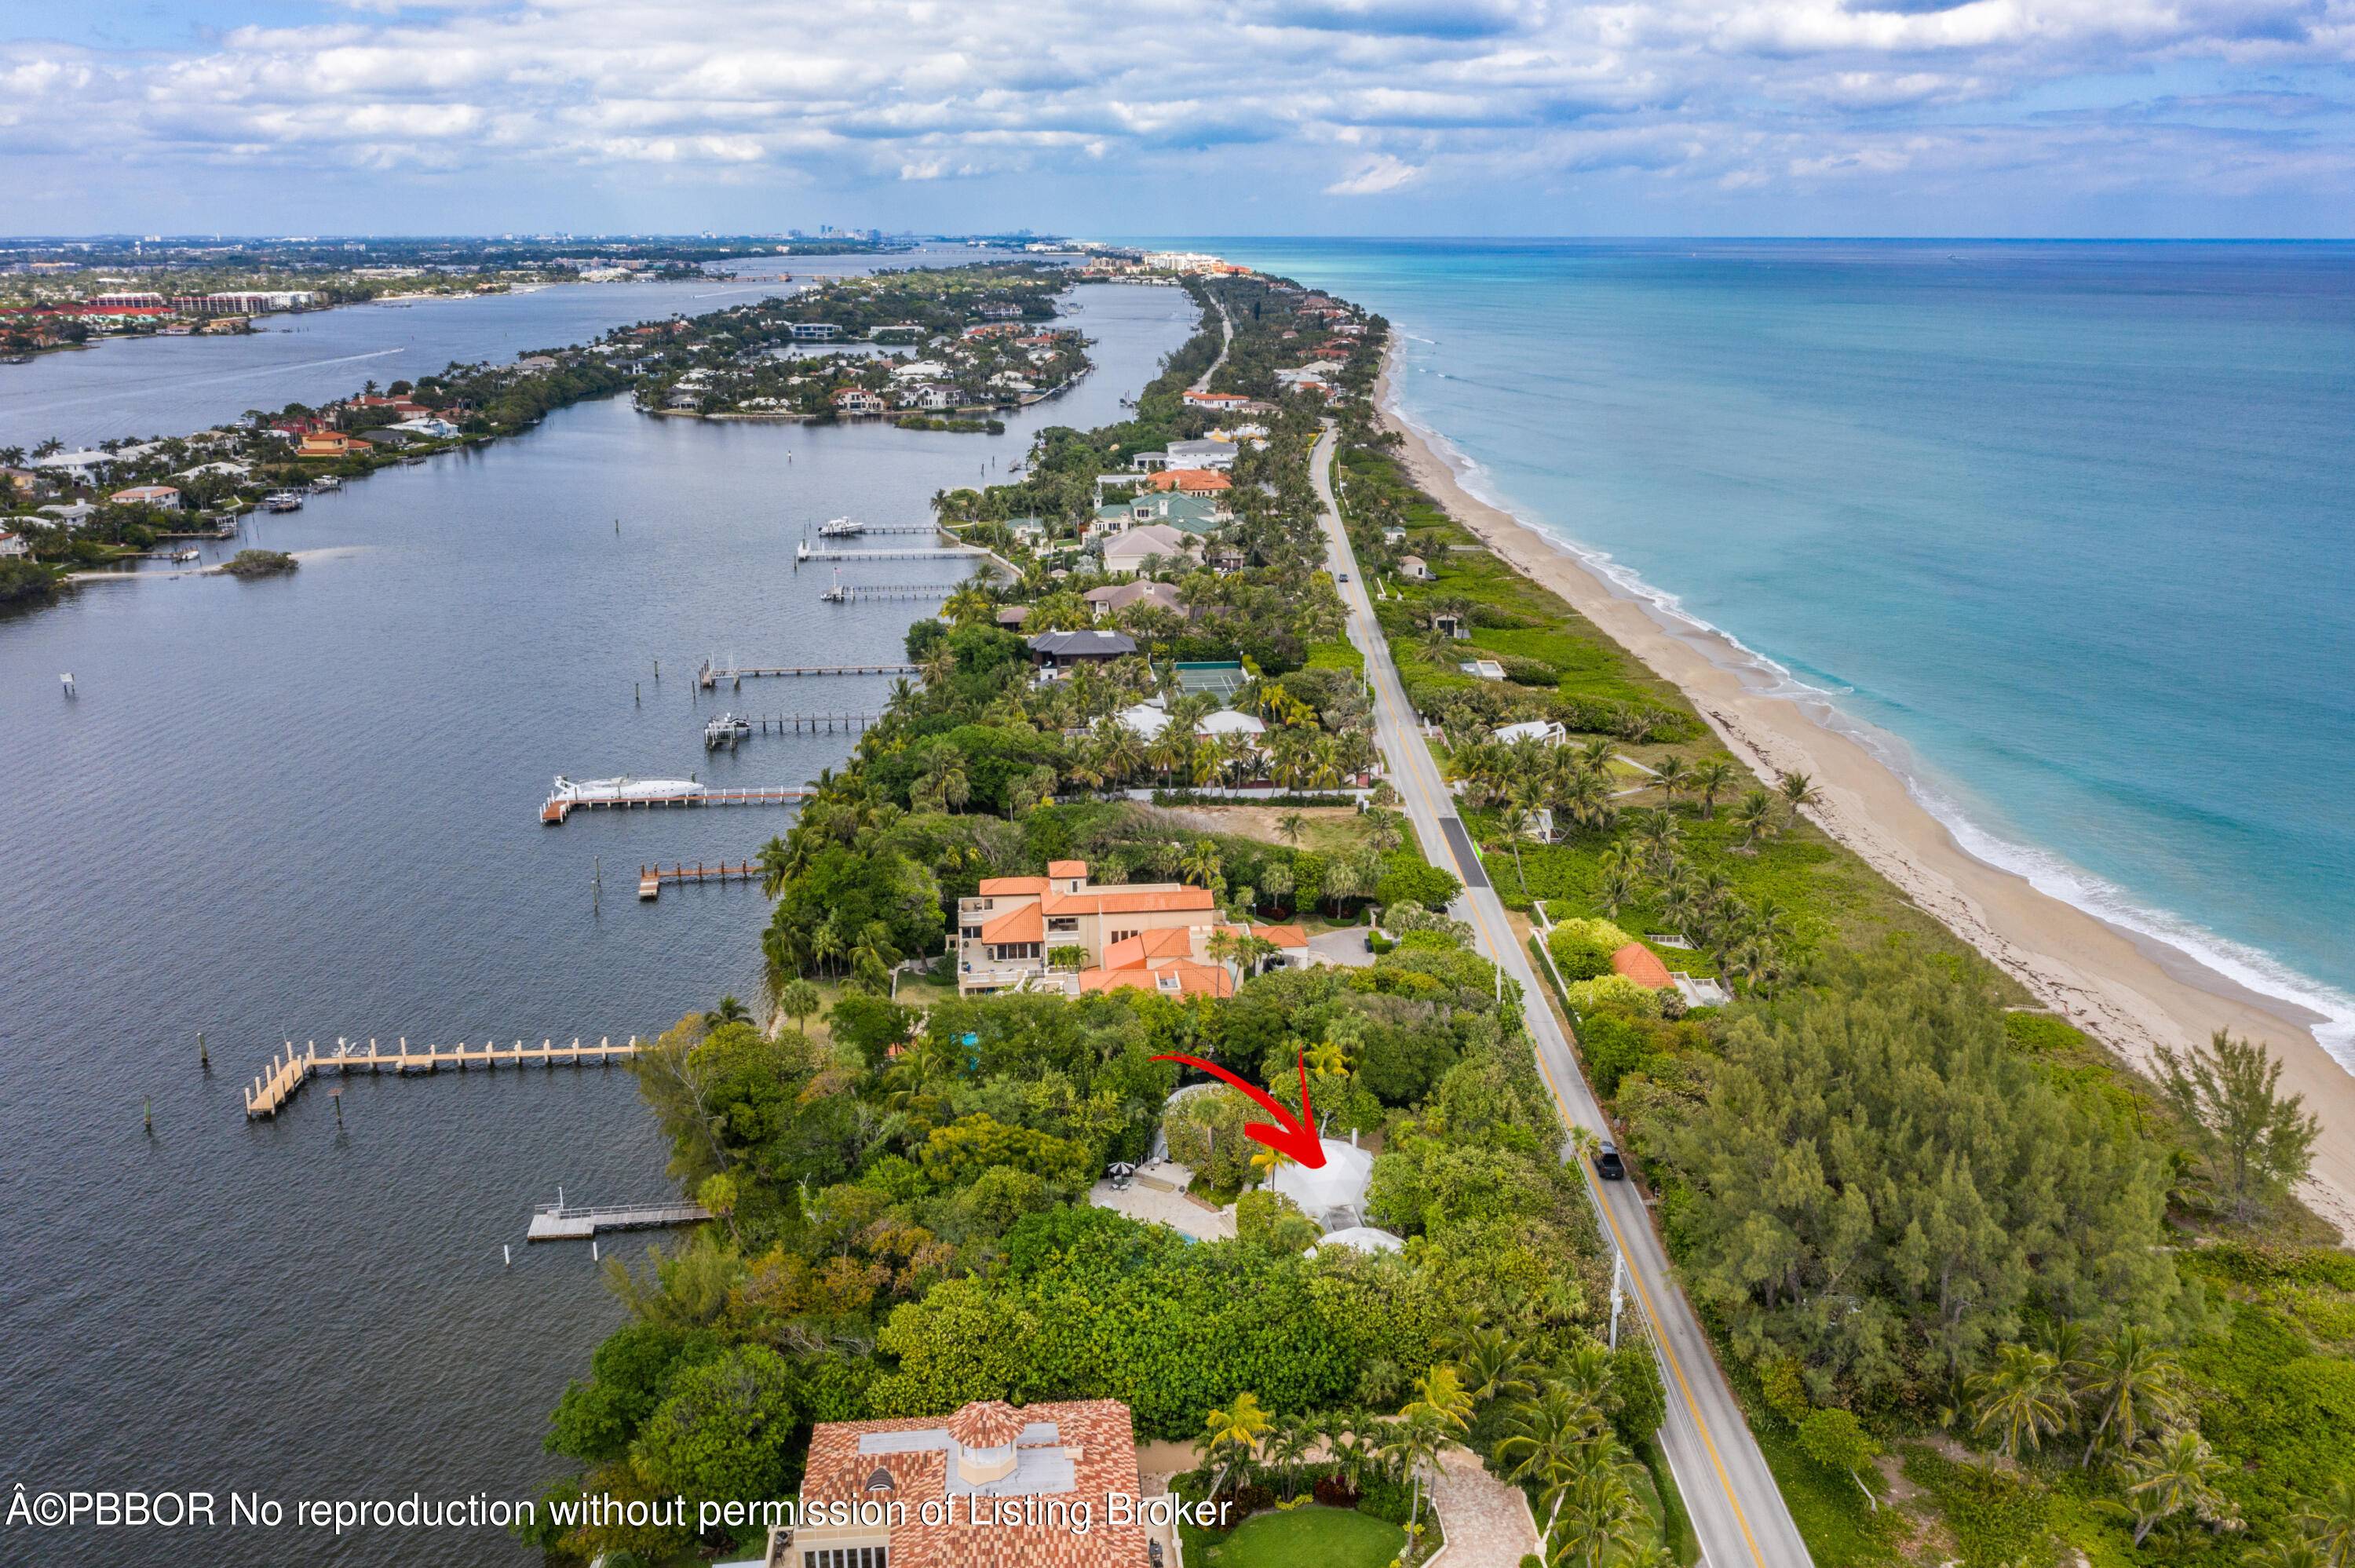 Rare opportunity to purchase the largest residential waterfront property available in Manalapan.